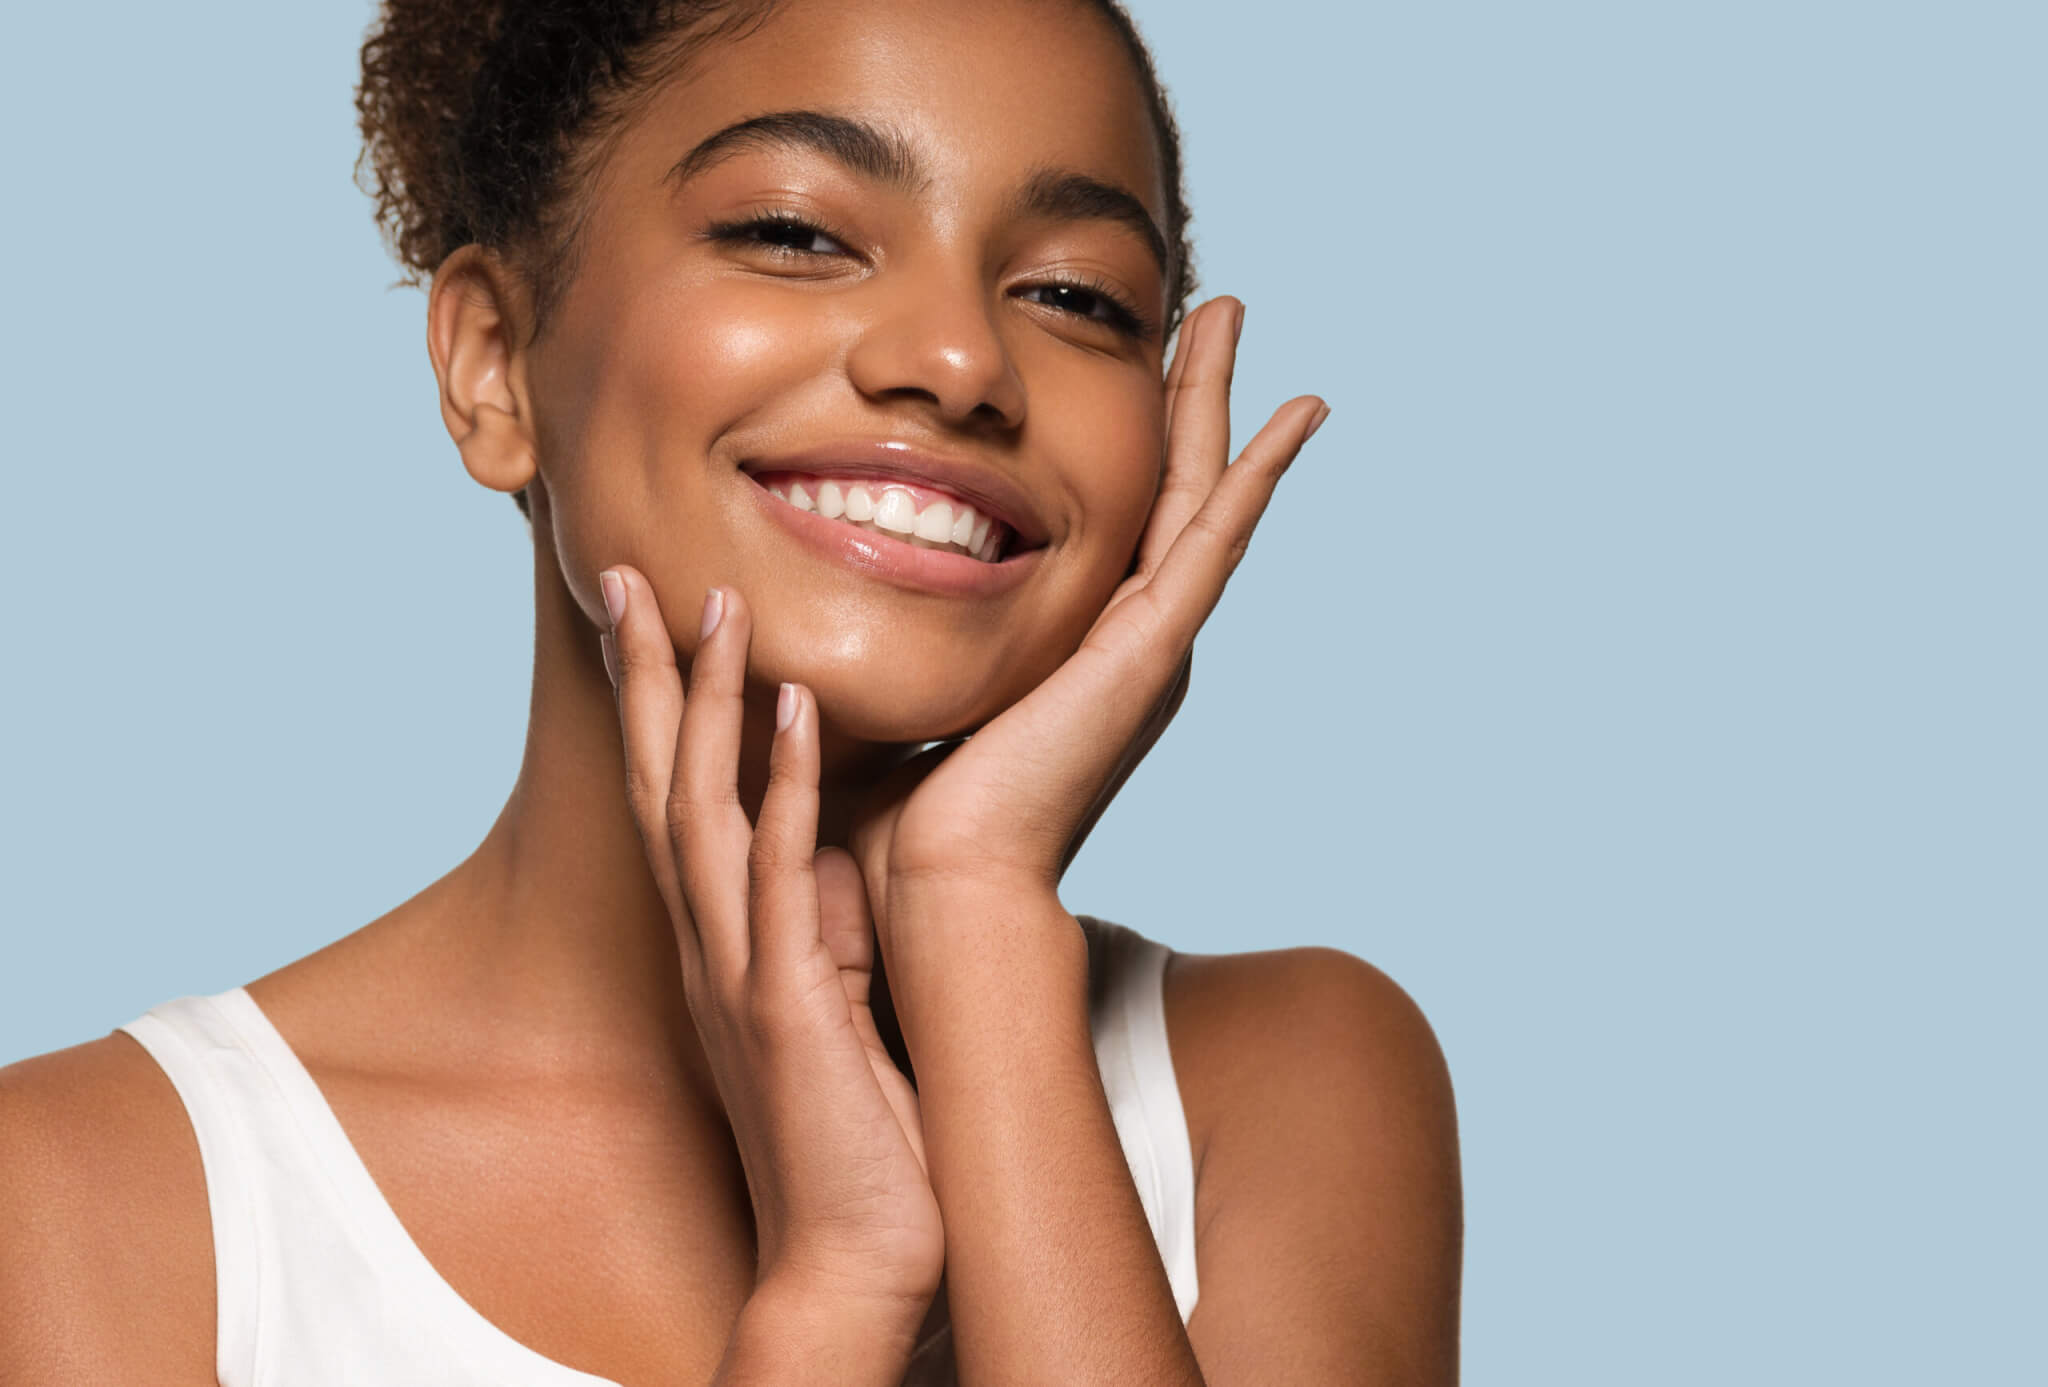 Woman with healthy and clean skin smiling